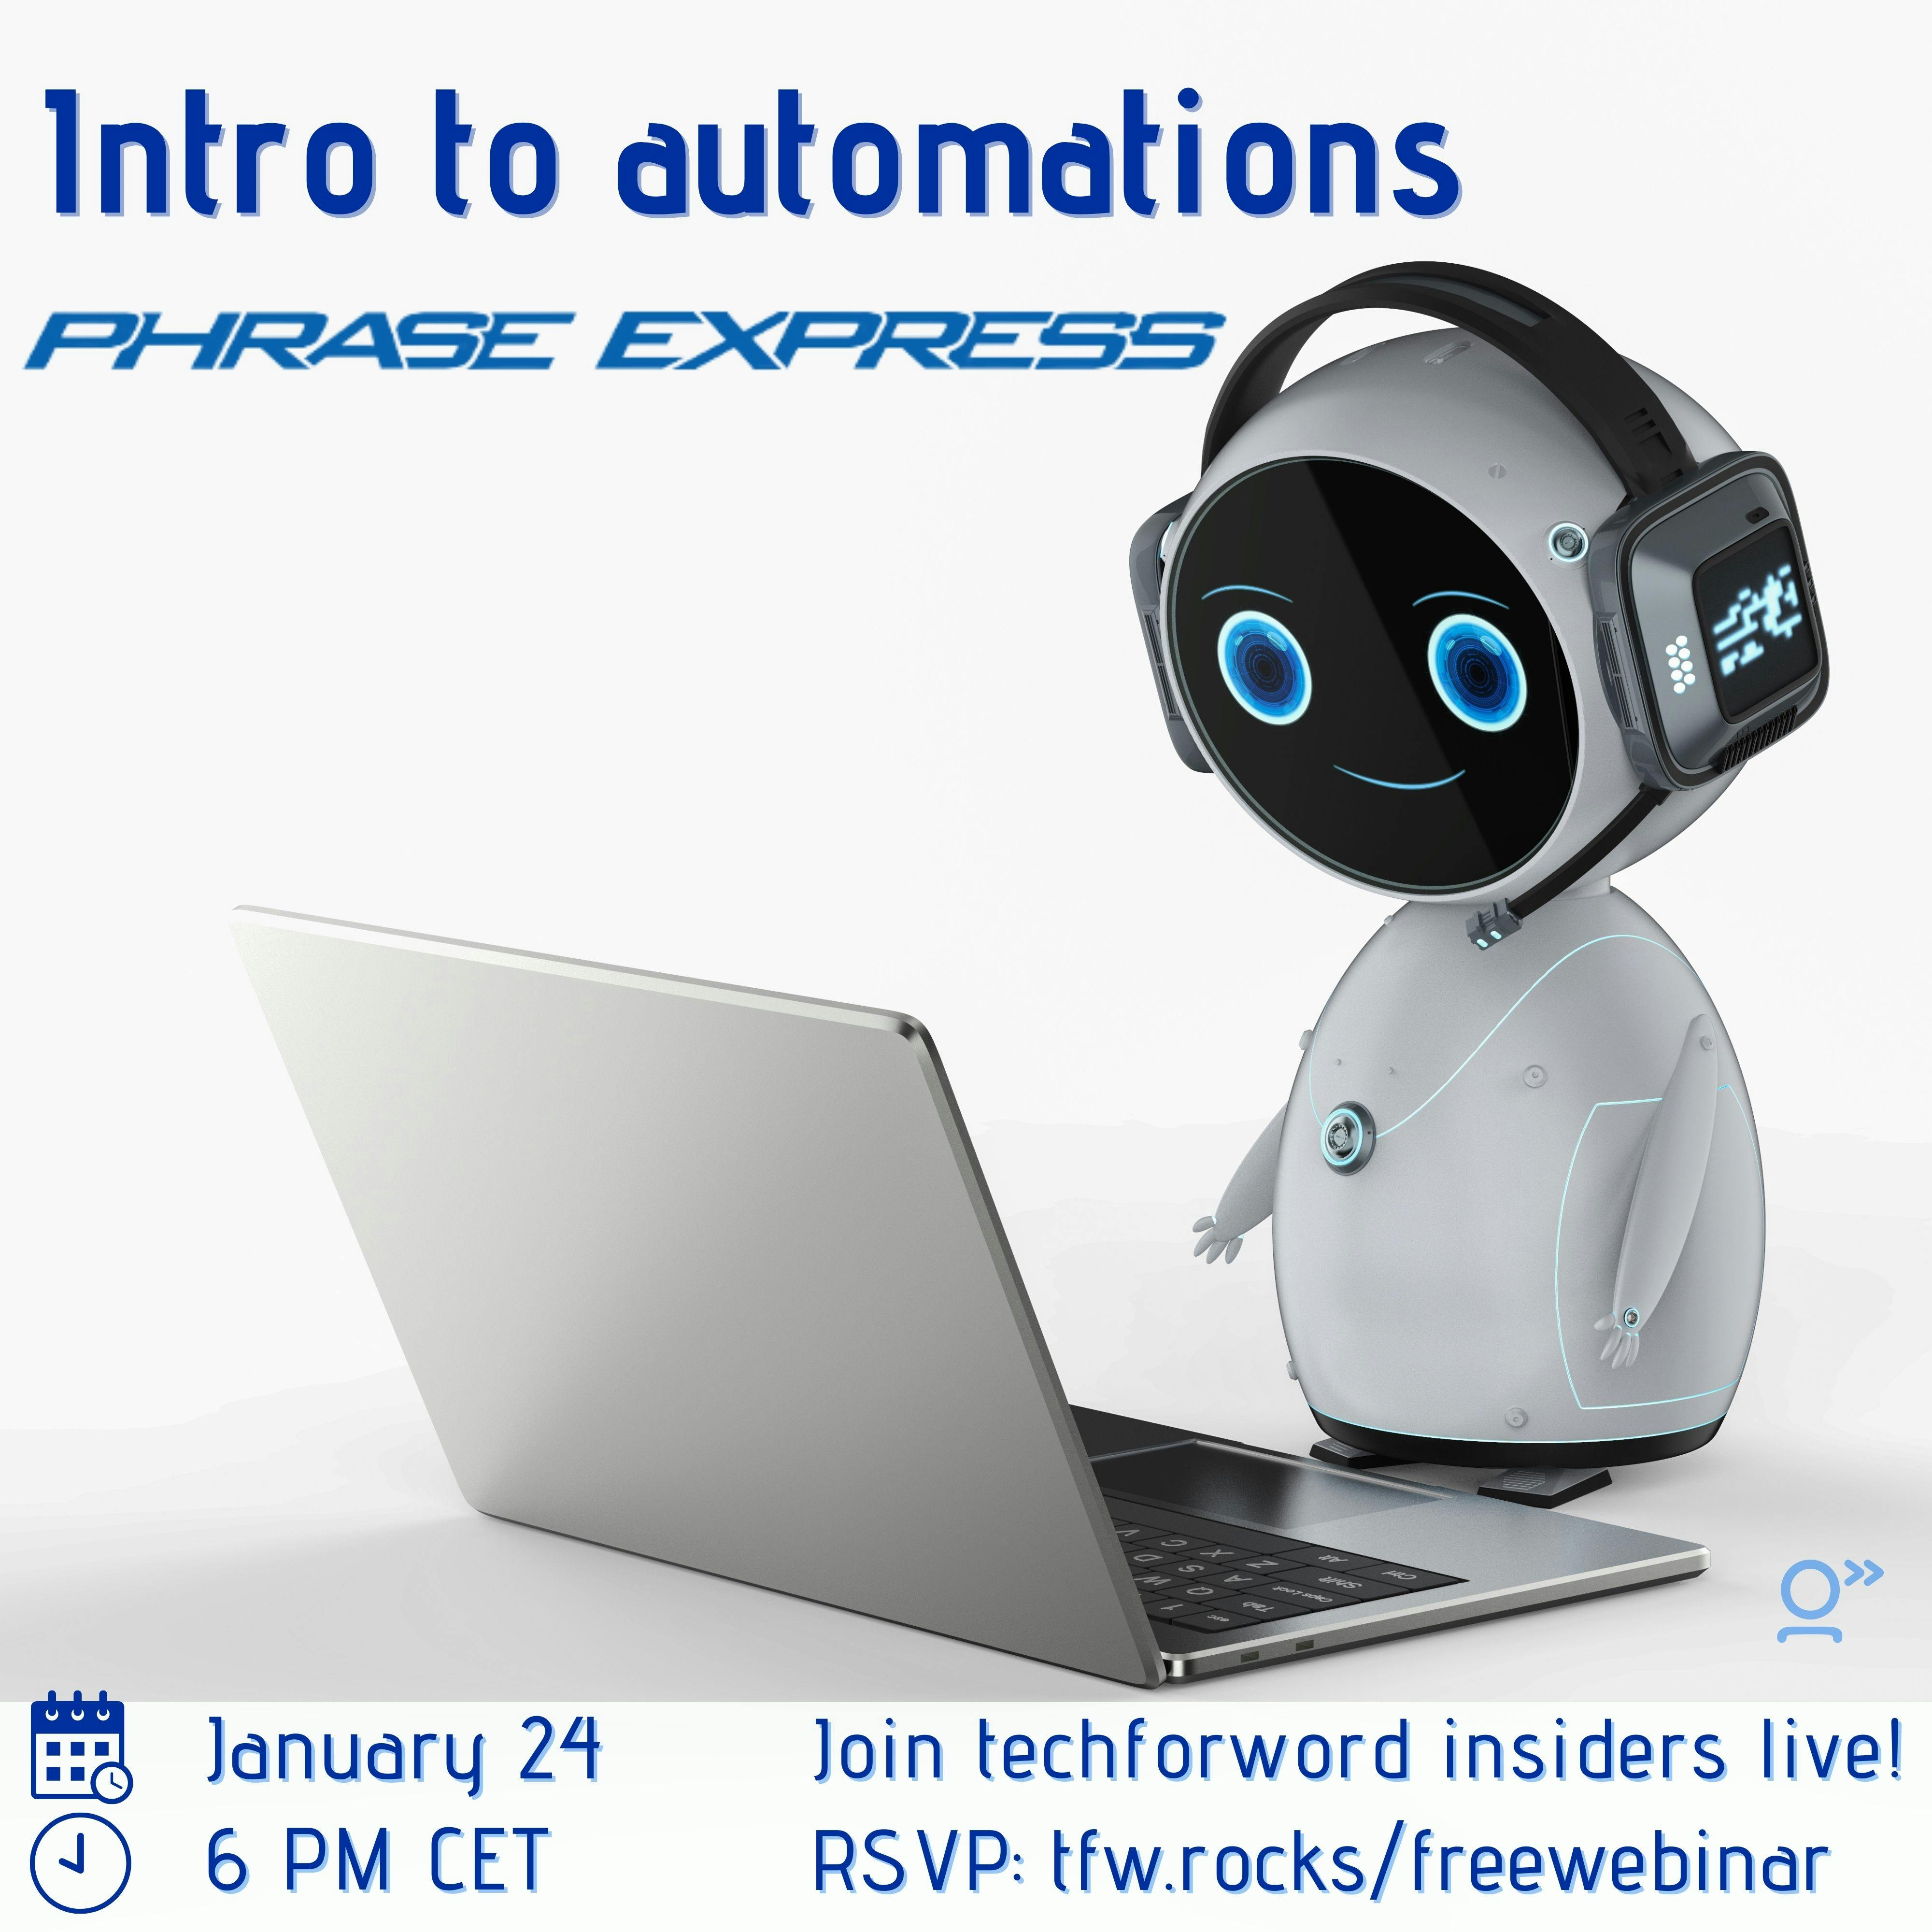 Image of a small, cute robot with a headset and a laptop. The title reads Intro to automations with Phrase Express. At the bottom of the image, we have the date and time of the webinar: January 24 at 6 PM CET, as well as the online location: tfw.rocks/freewebinar